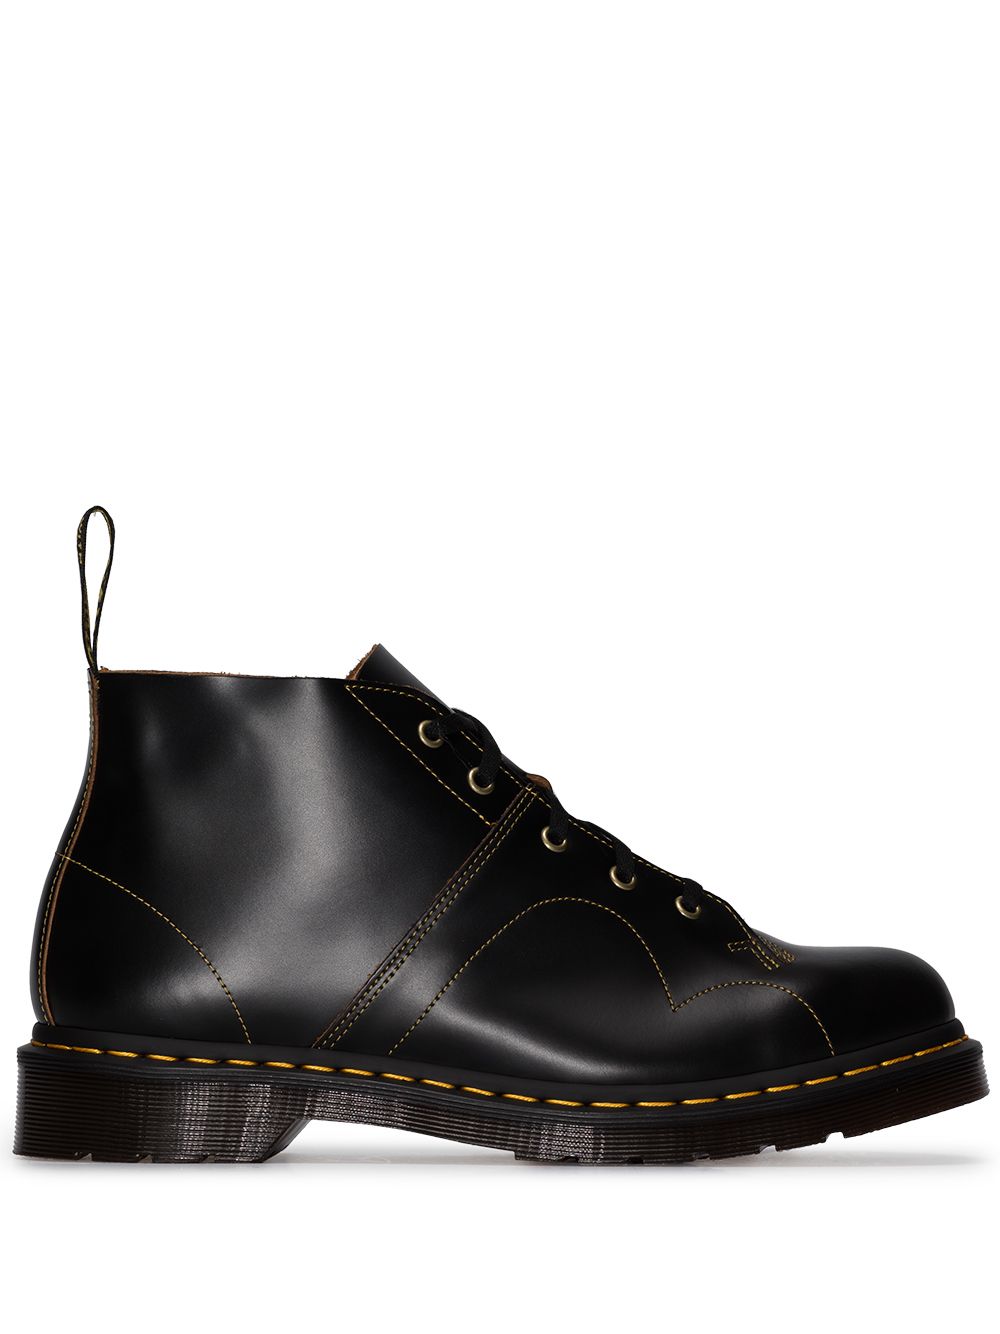 Image 1 of Dr. Martens leather lace-up booties